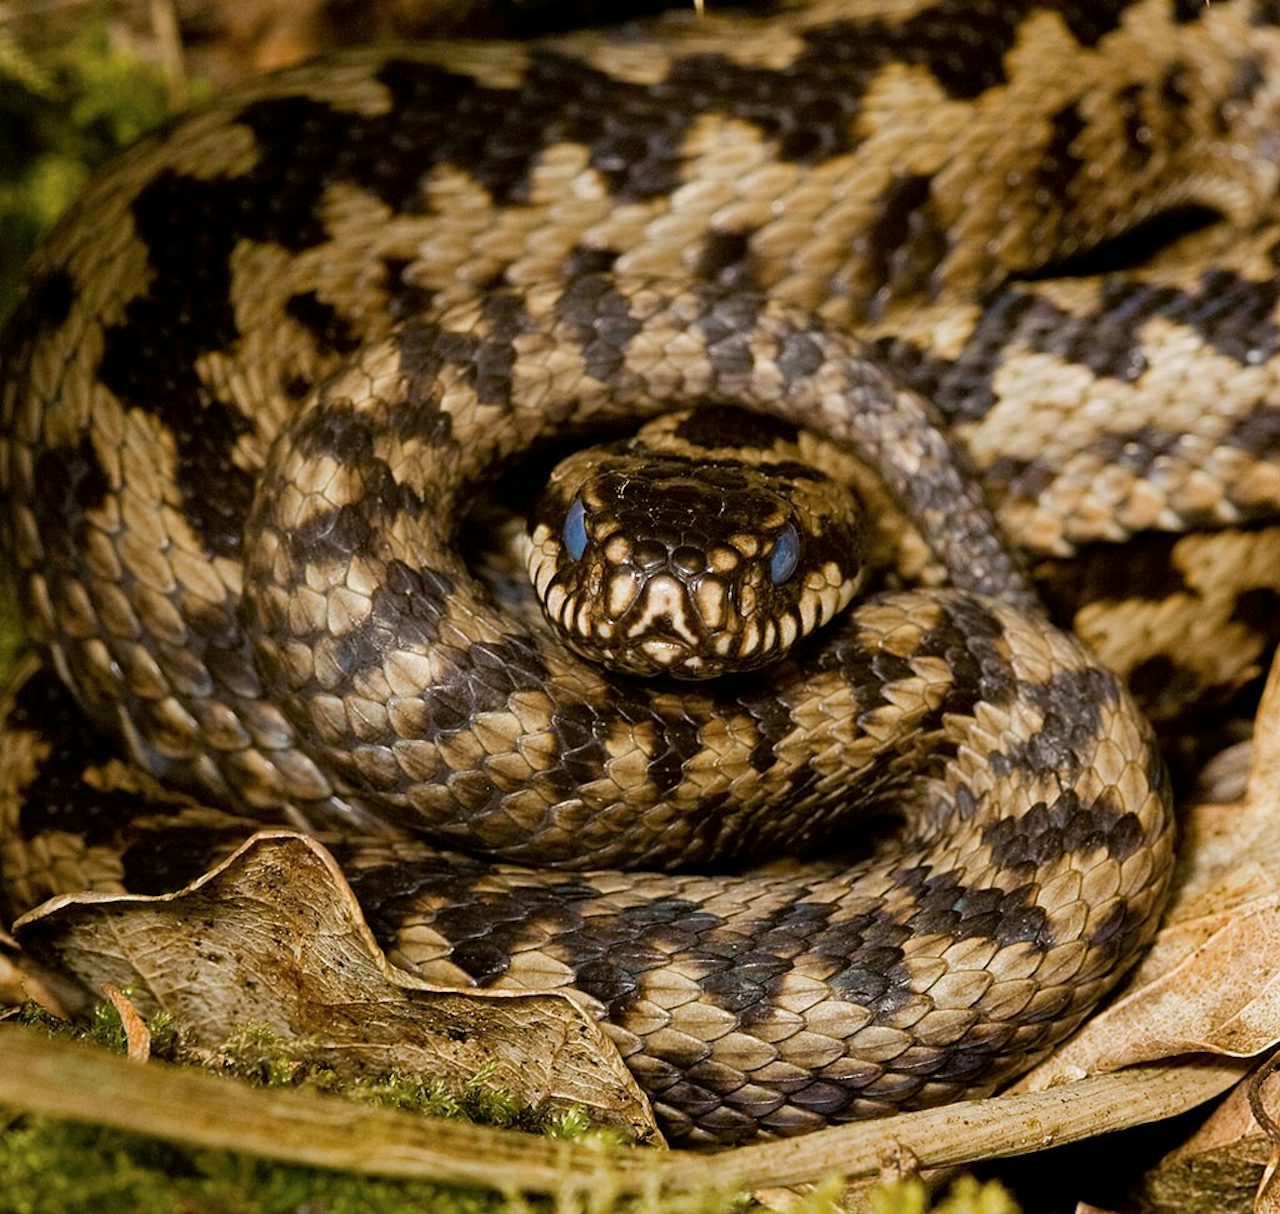 Winter strategy: Hibernate and watch a snake movie | The Outline